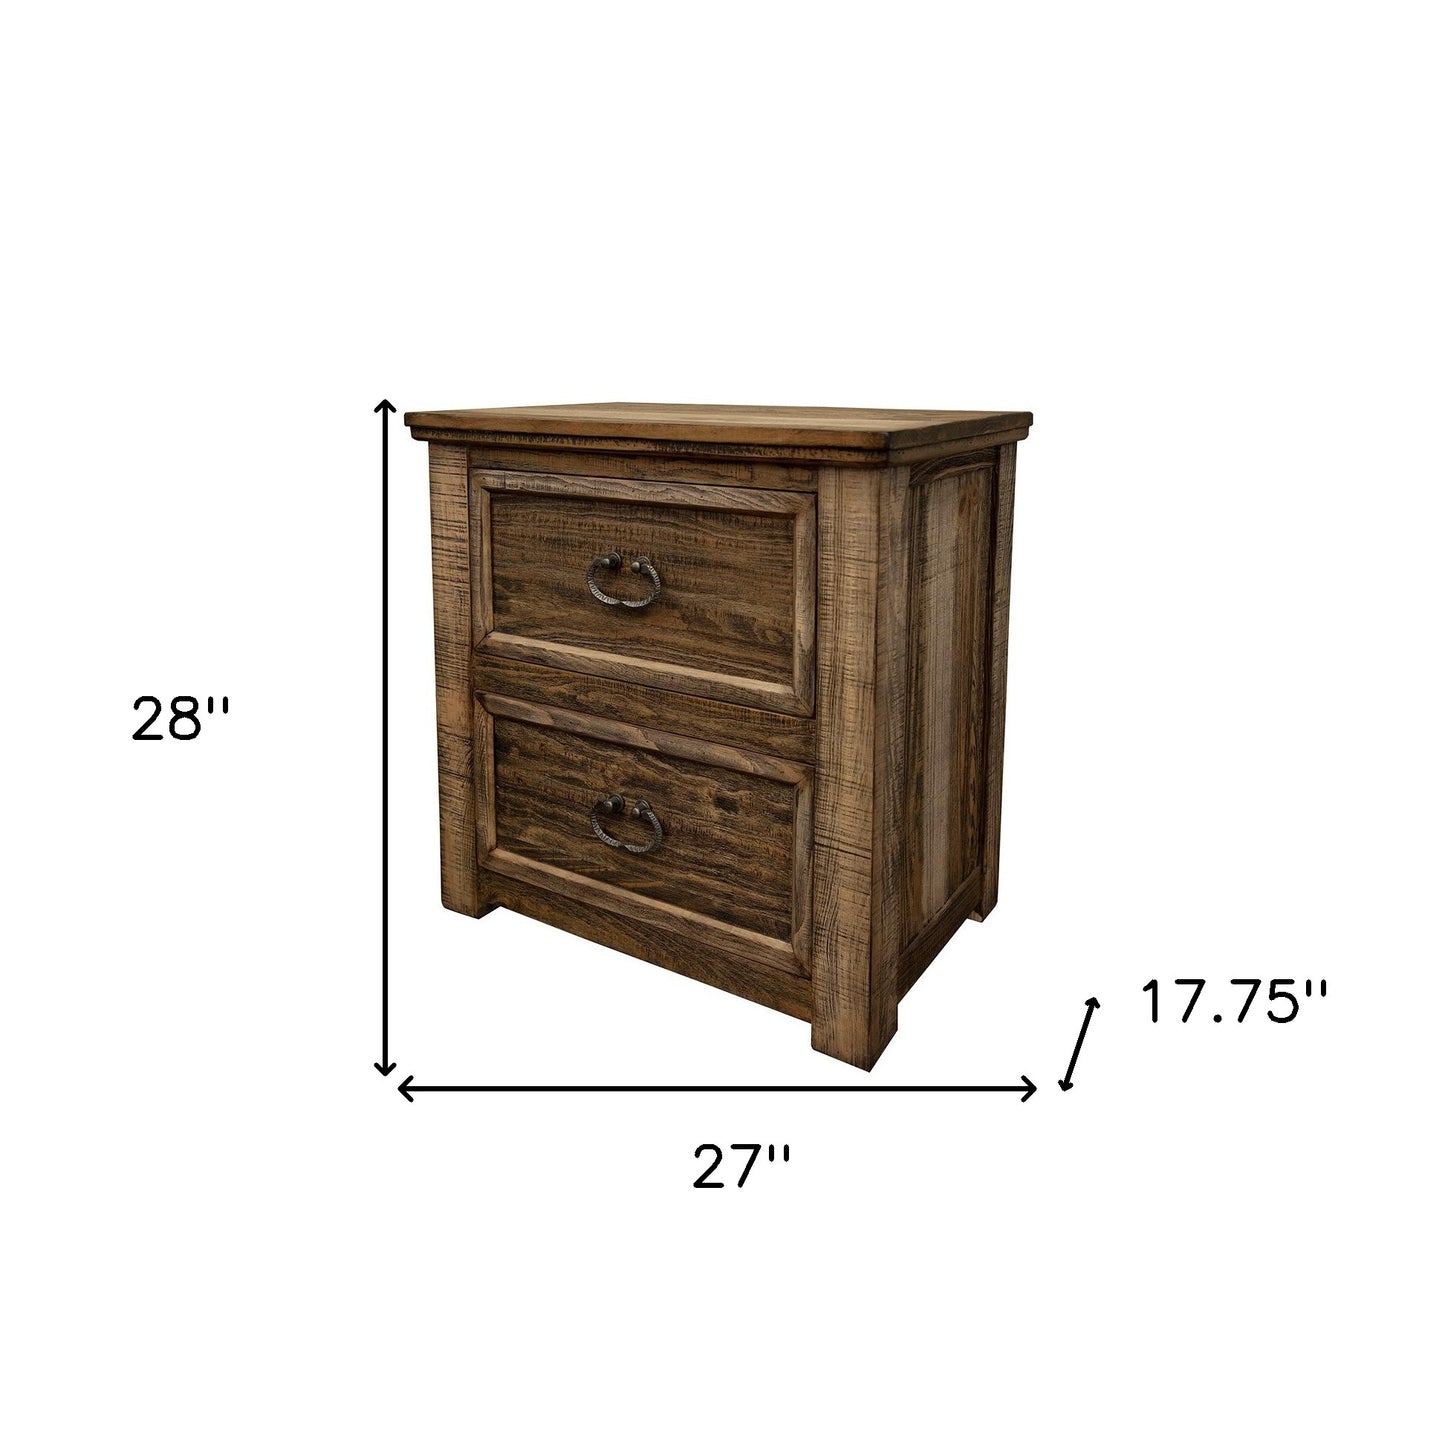 28" Wood Brown Two Drawer Nightstand